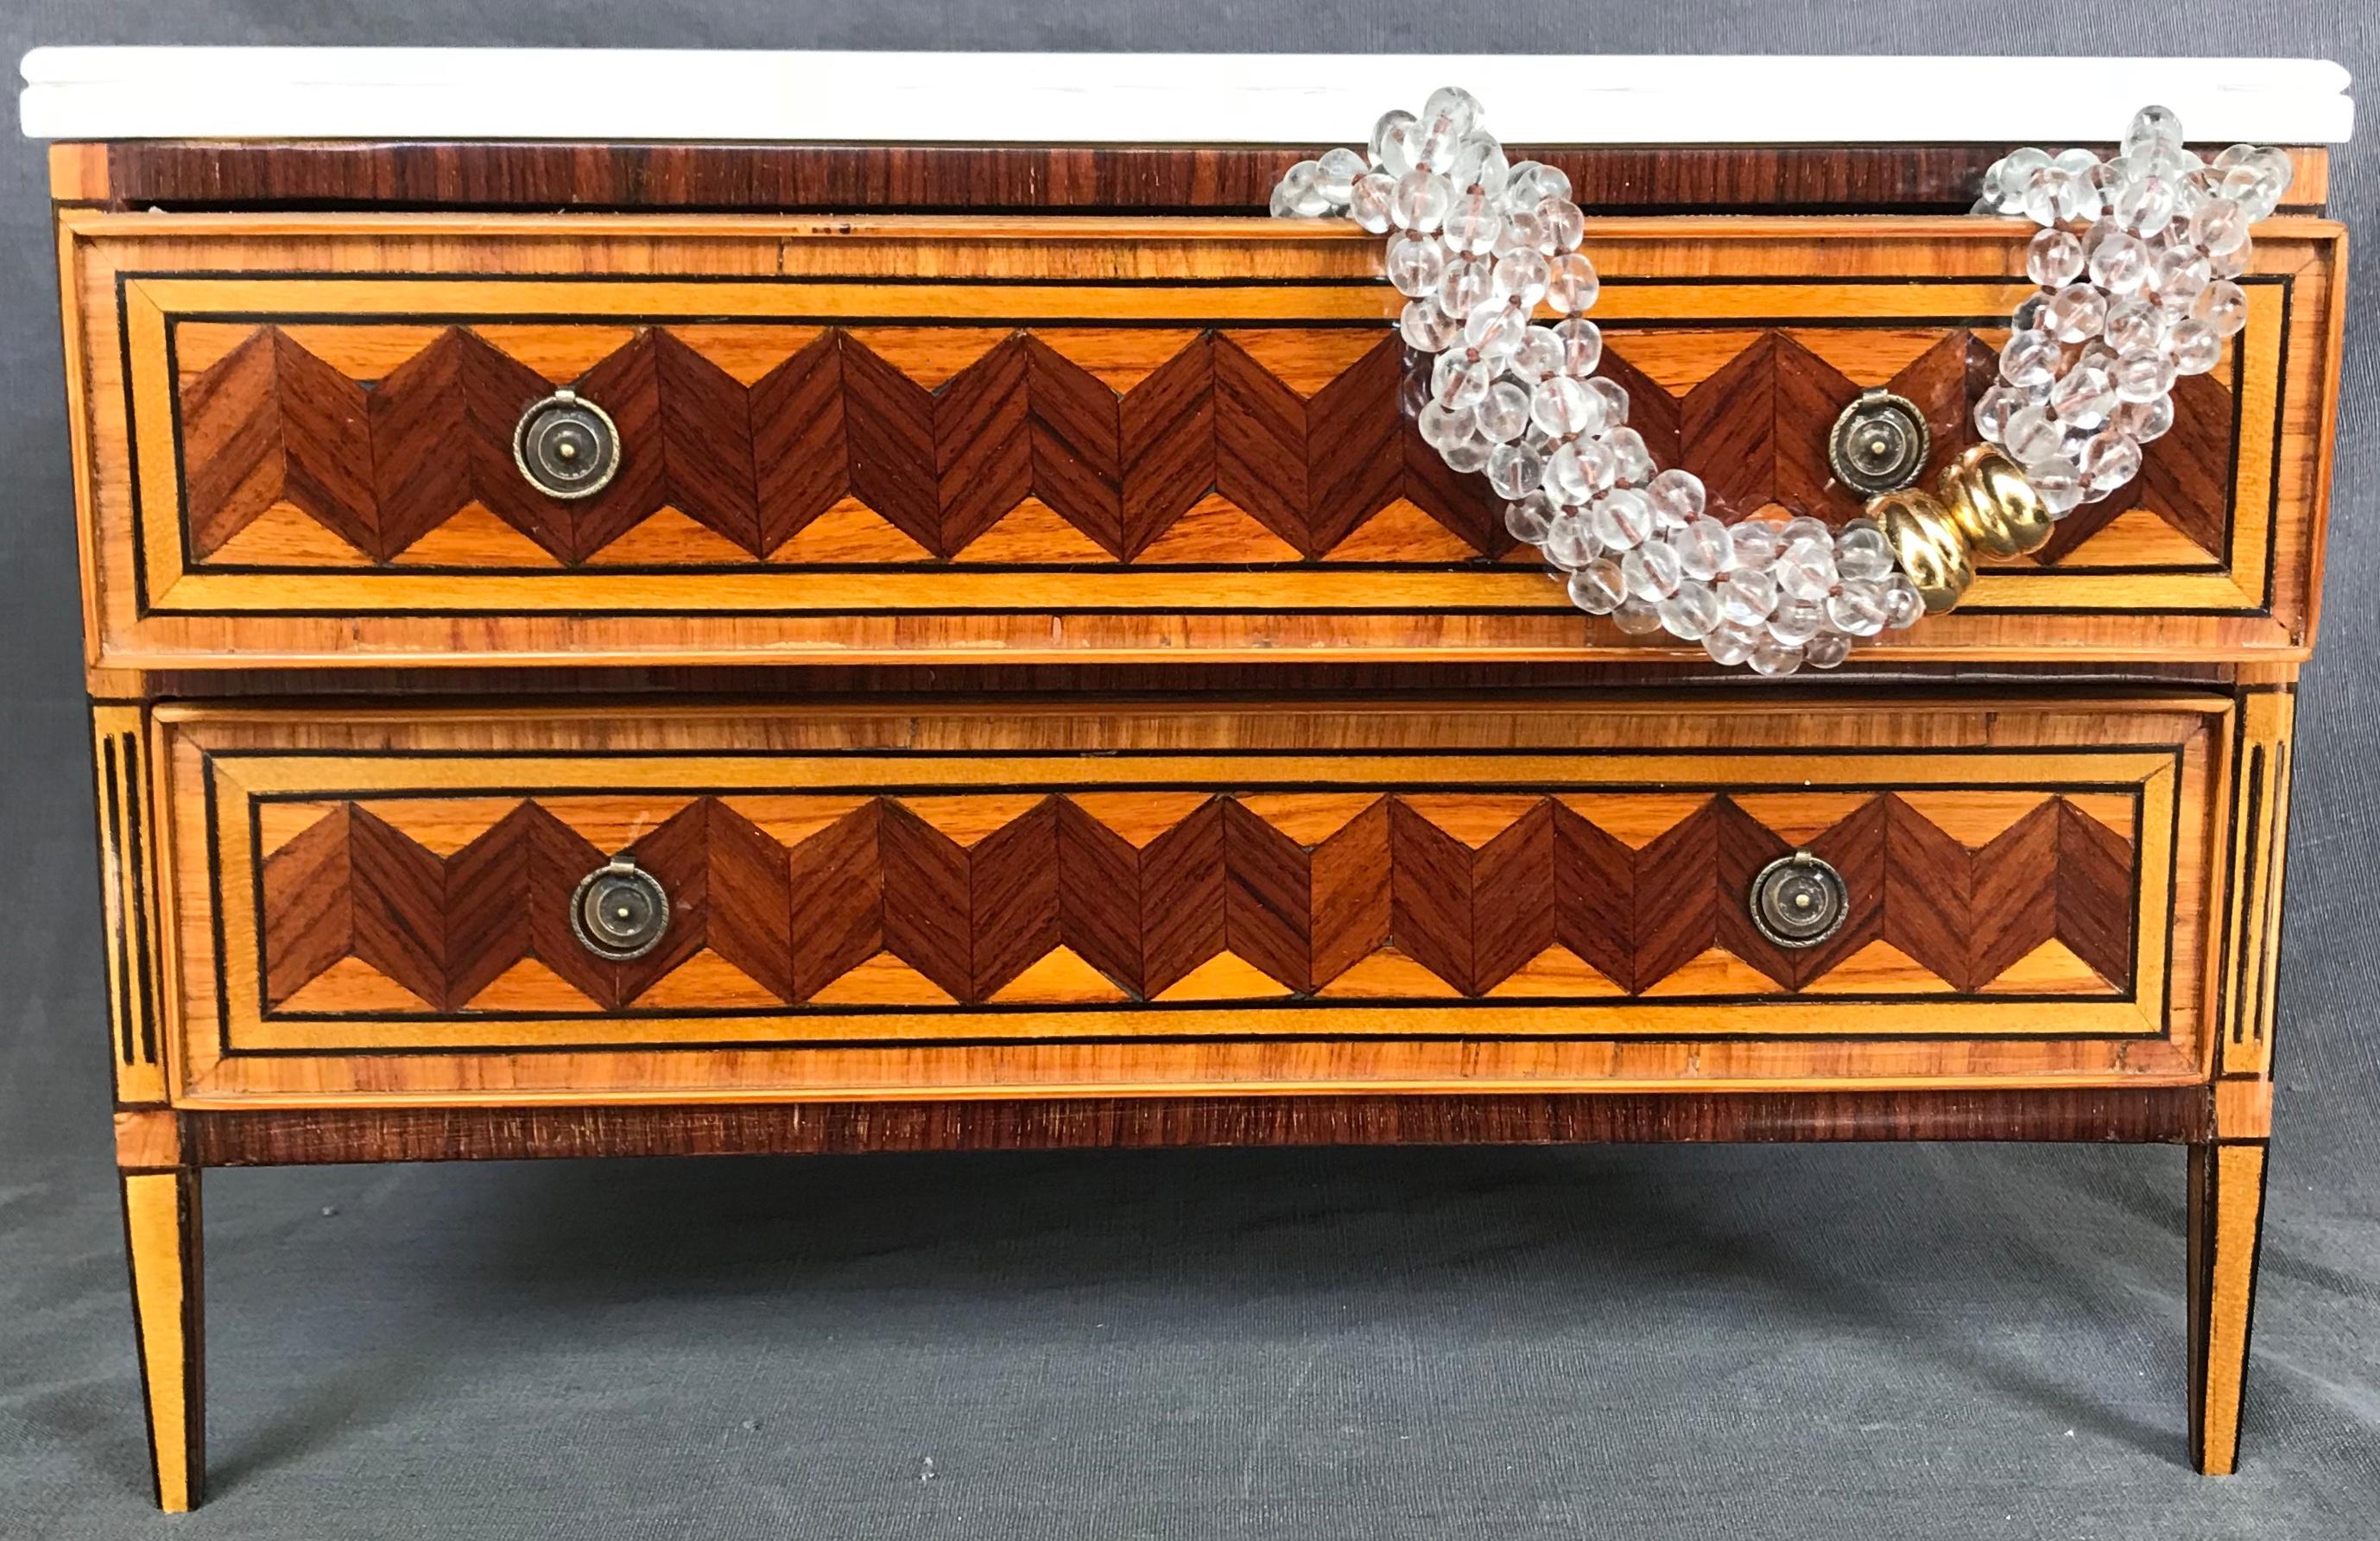 Italian jewelry box. Neoclassical style miniature chest of drawers fit for jewels.  A scaled replica of a Louis XVI boxwood, palissander, rosewood and ebony inlaid commode with antique Carrara marble top and velvet lined drawers finished on all